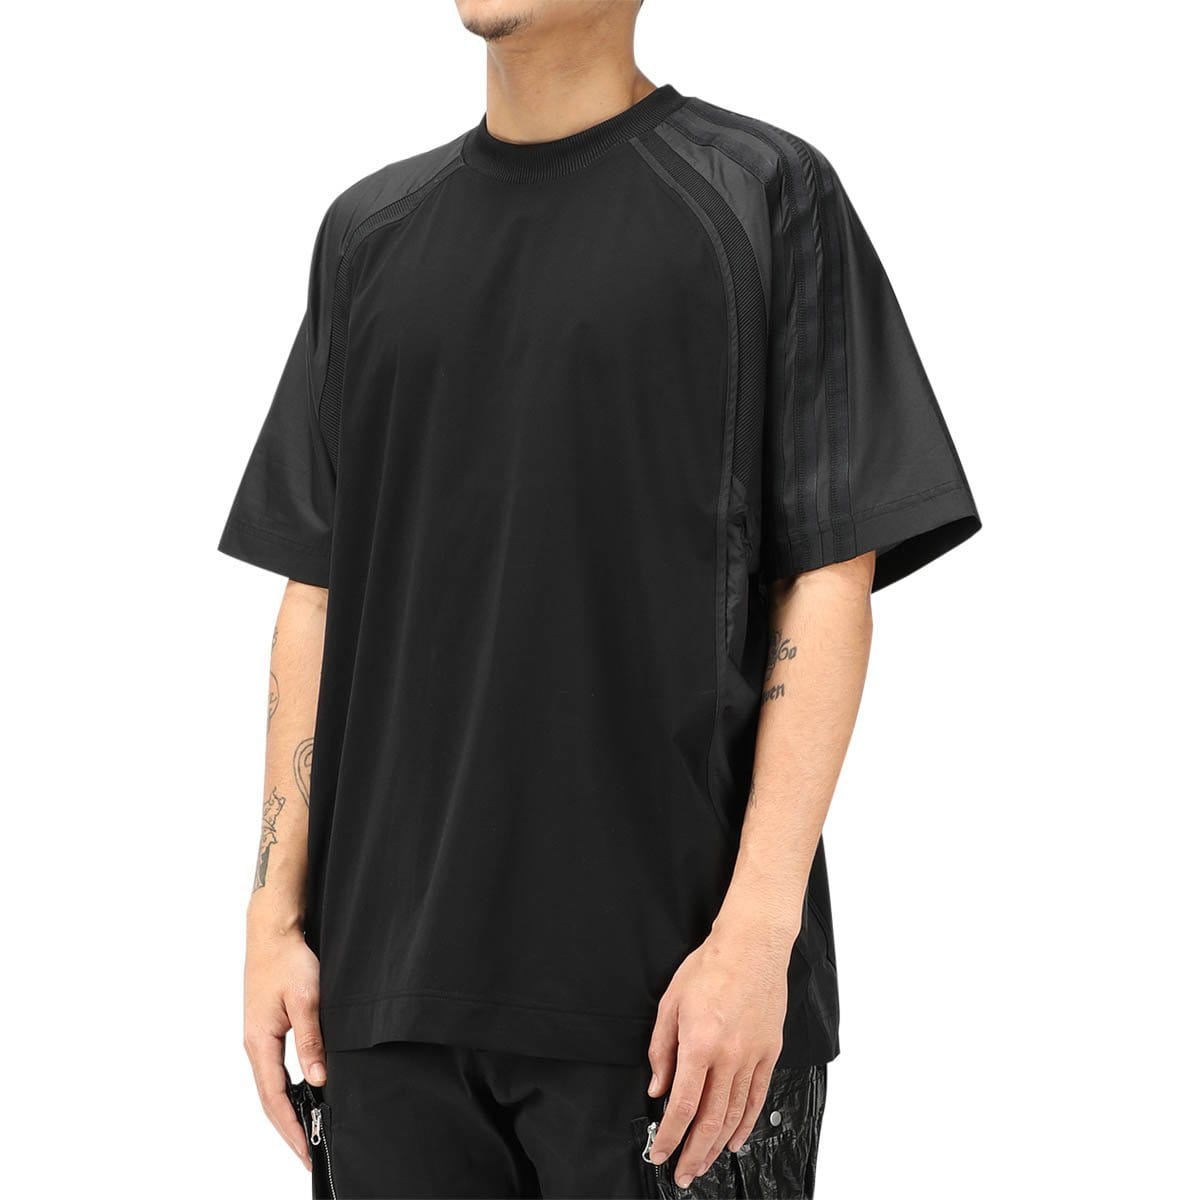 Y-3 3-STRIPES MATERIAL MIX TEE Black